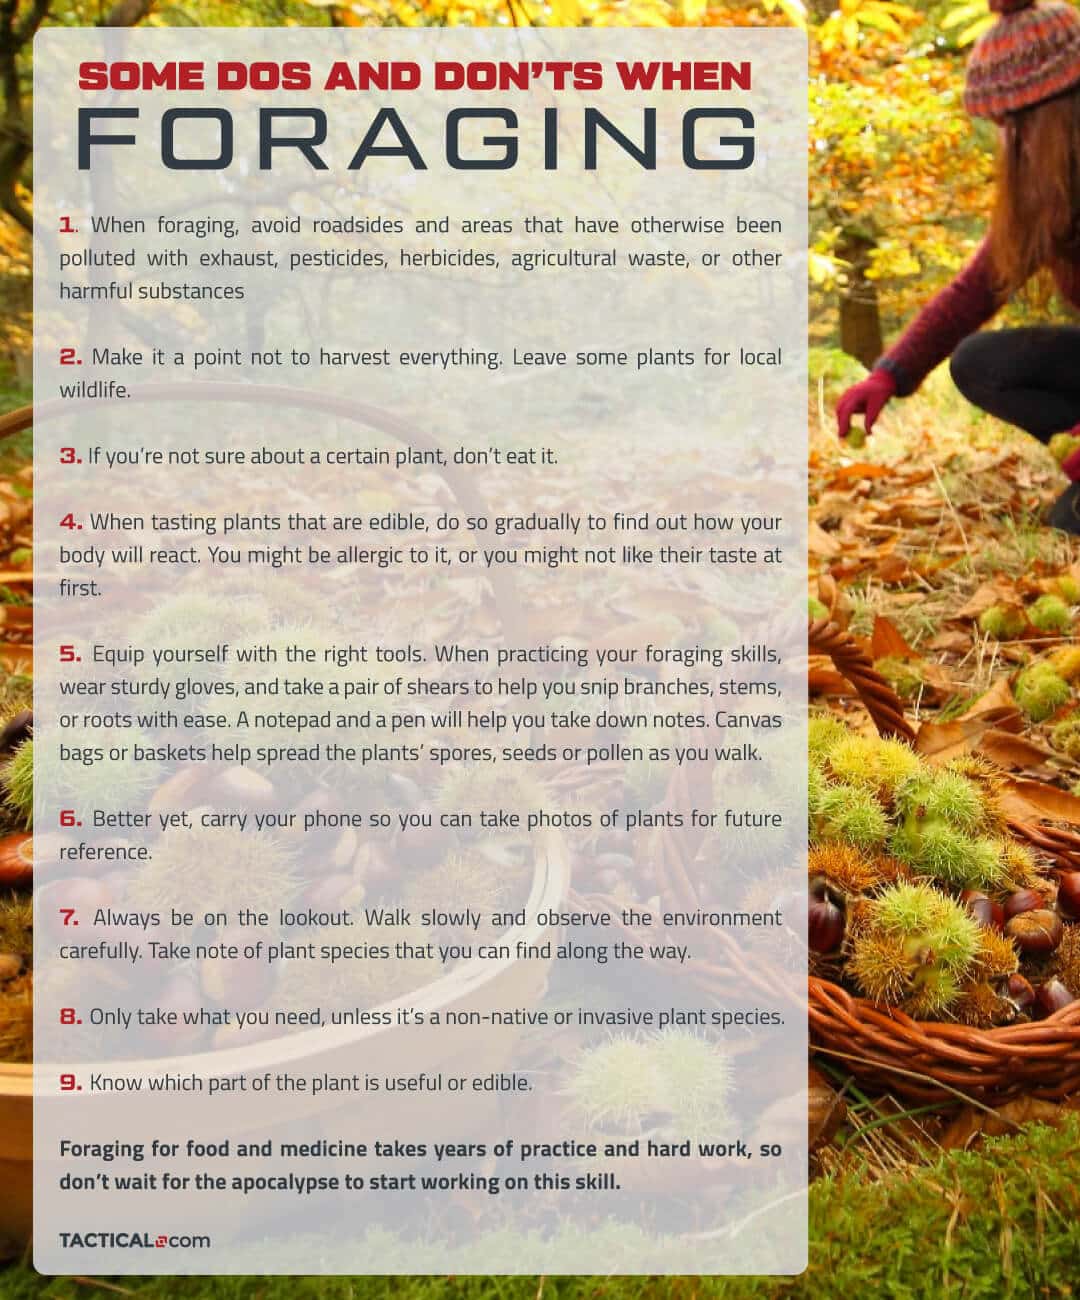 Foraging tips